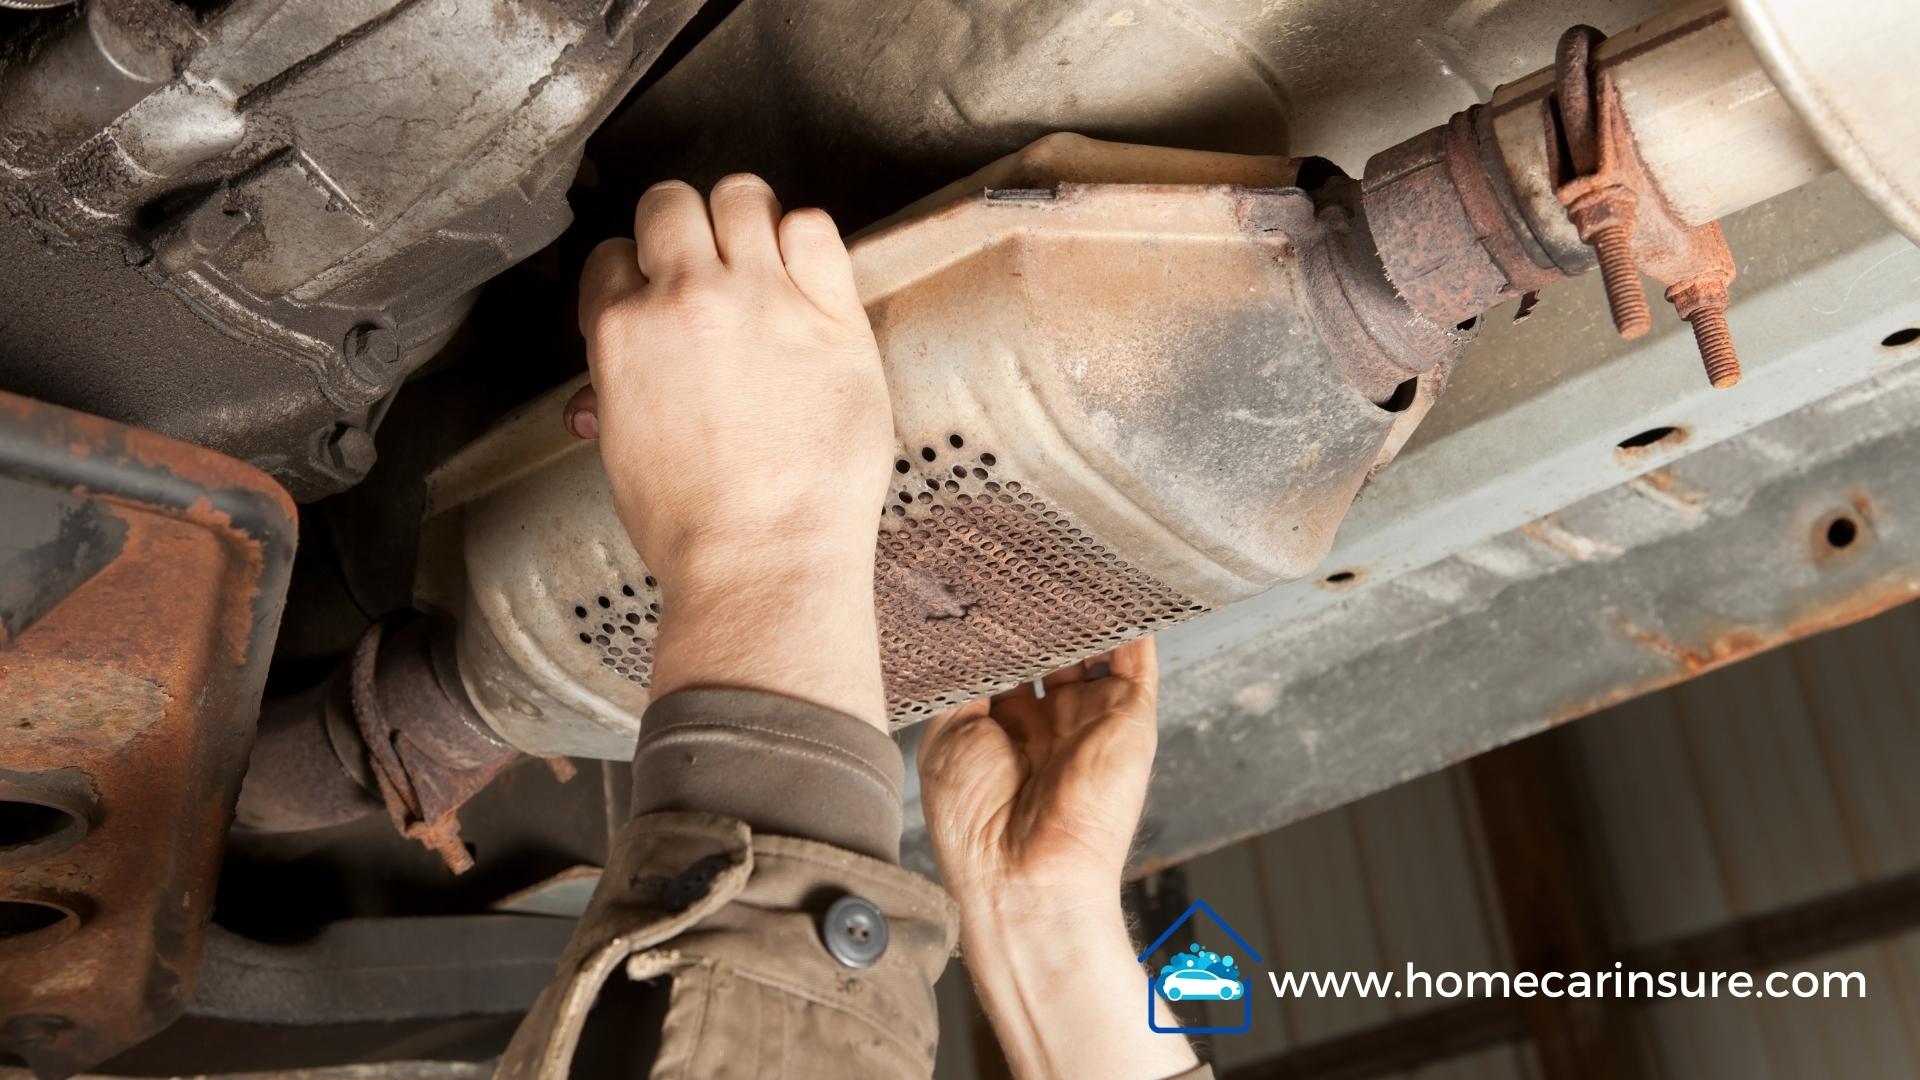 Does auto insurance cover catalytic converter theft